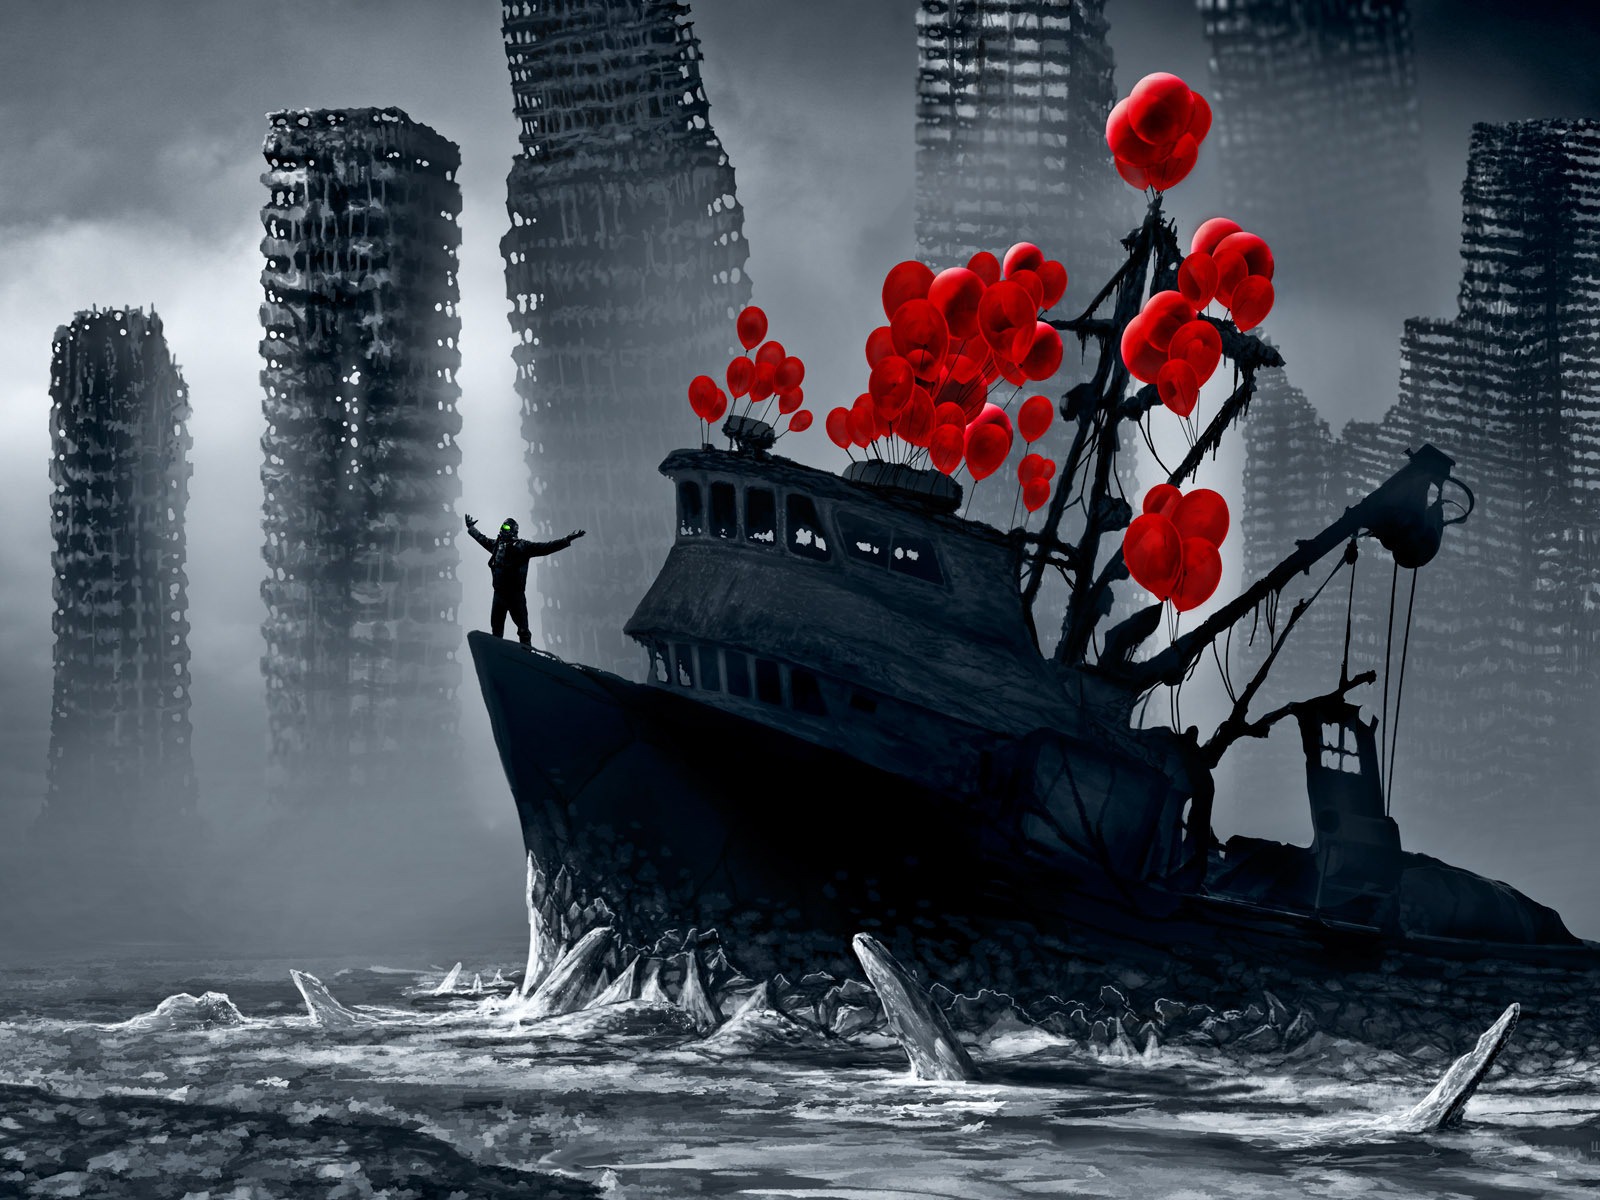 Romantically Apocalyptic creative painting wallpapers (2) #19 - 1600x1200